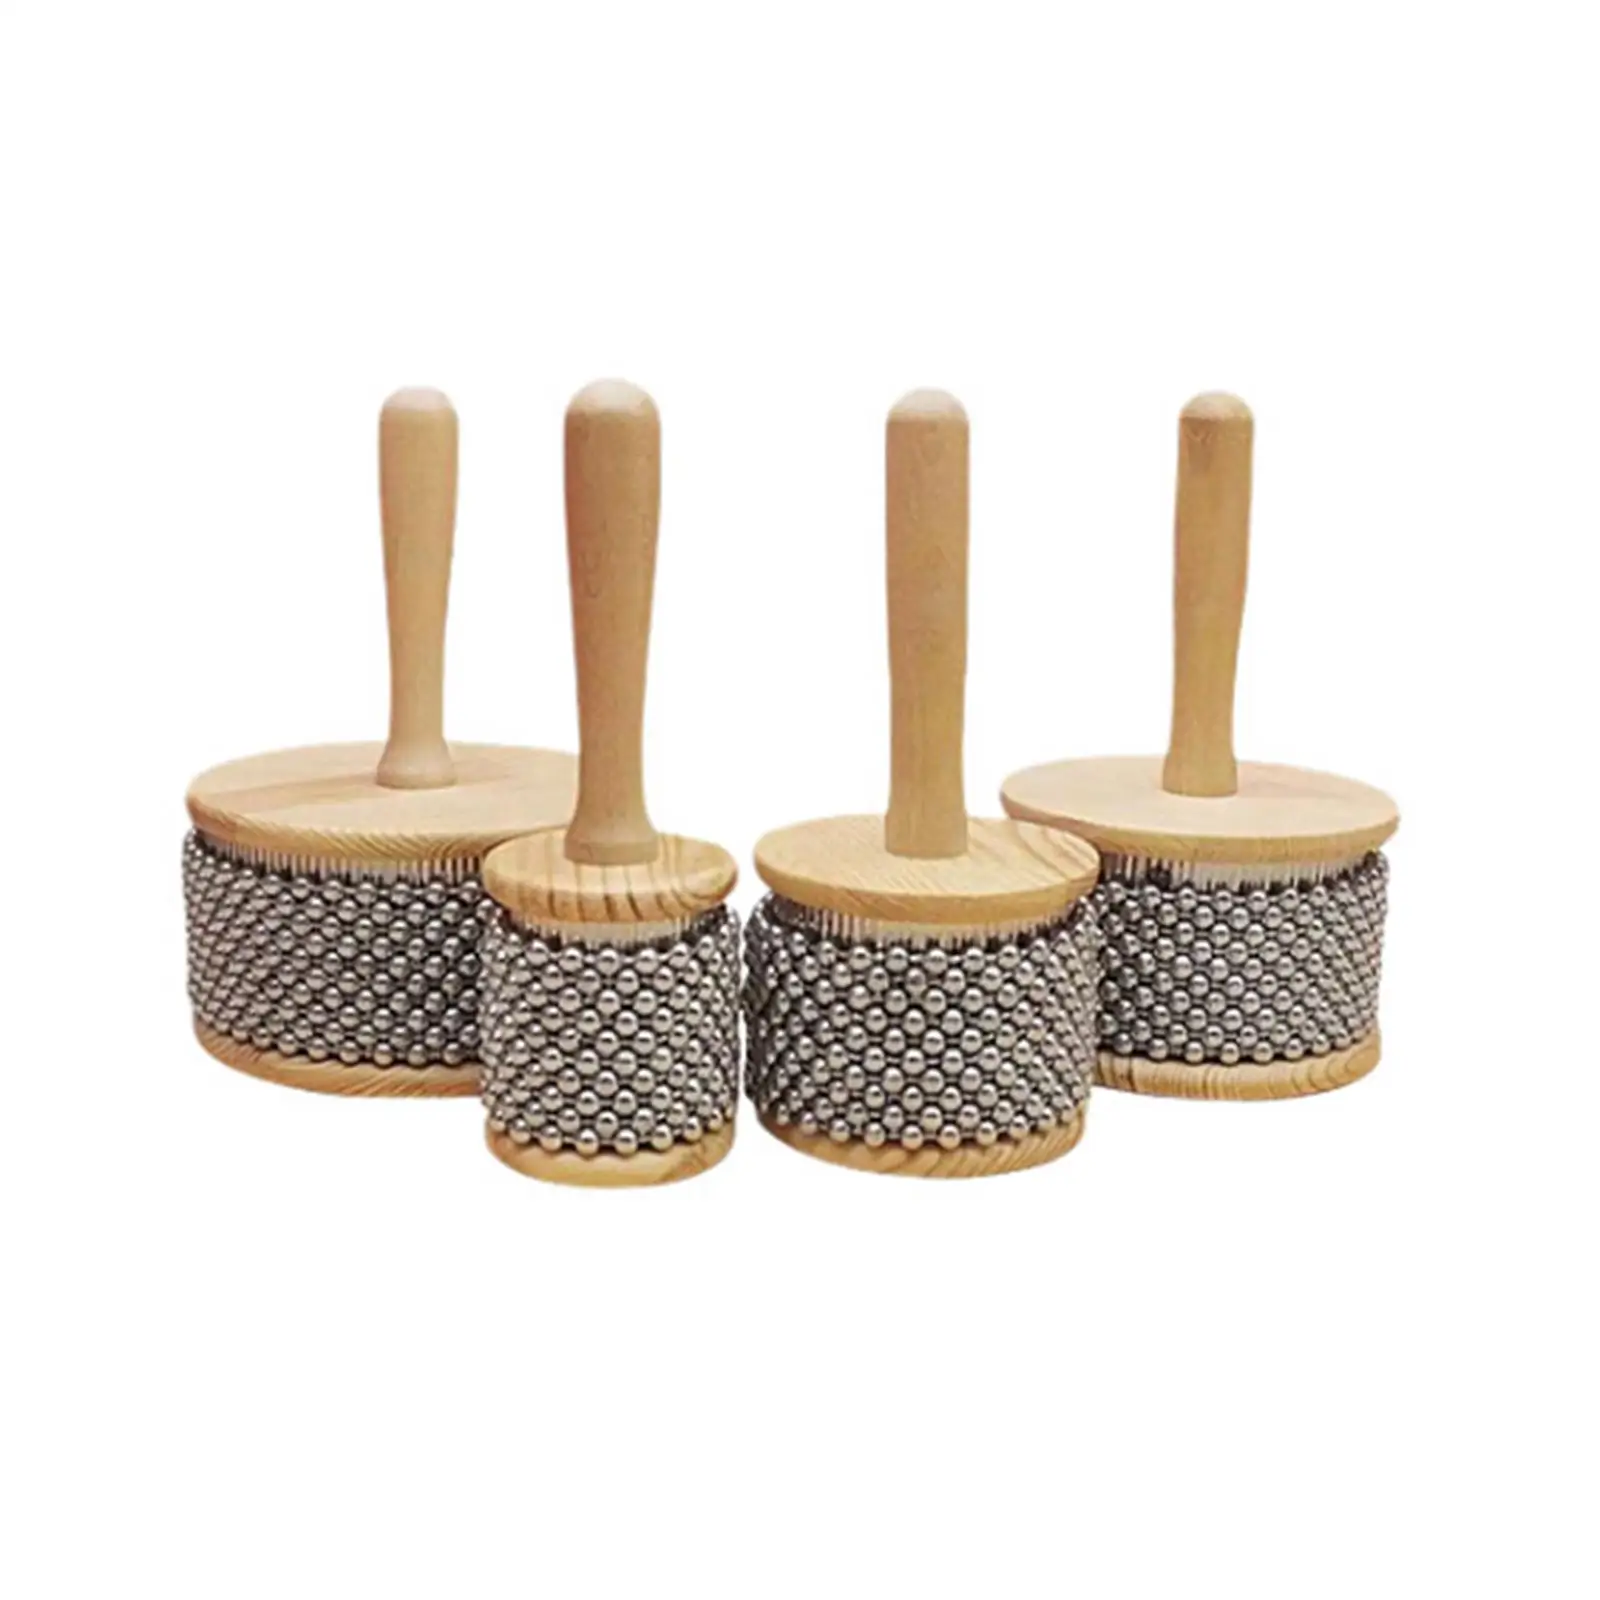 Wooden Hand Cabasa Hand Shaker Cabasa Instrument Shaker Percussion Fun Musical Toy for Playing at Home Classroom Music Education